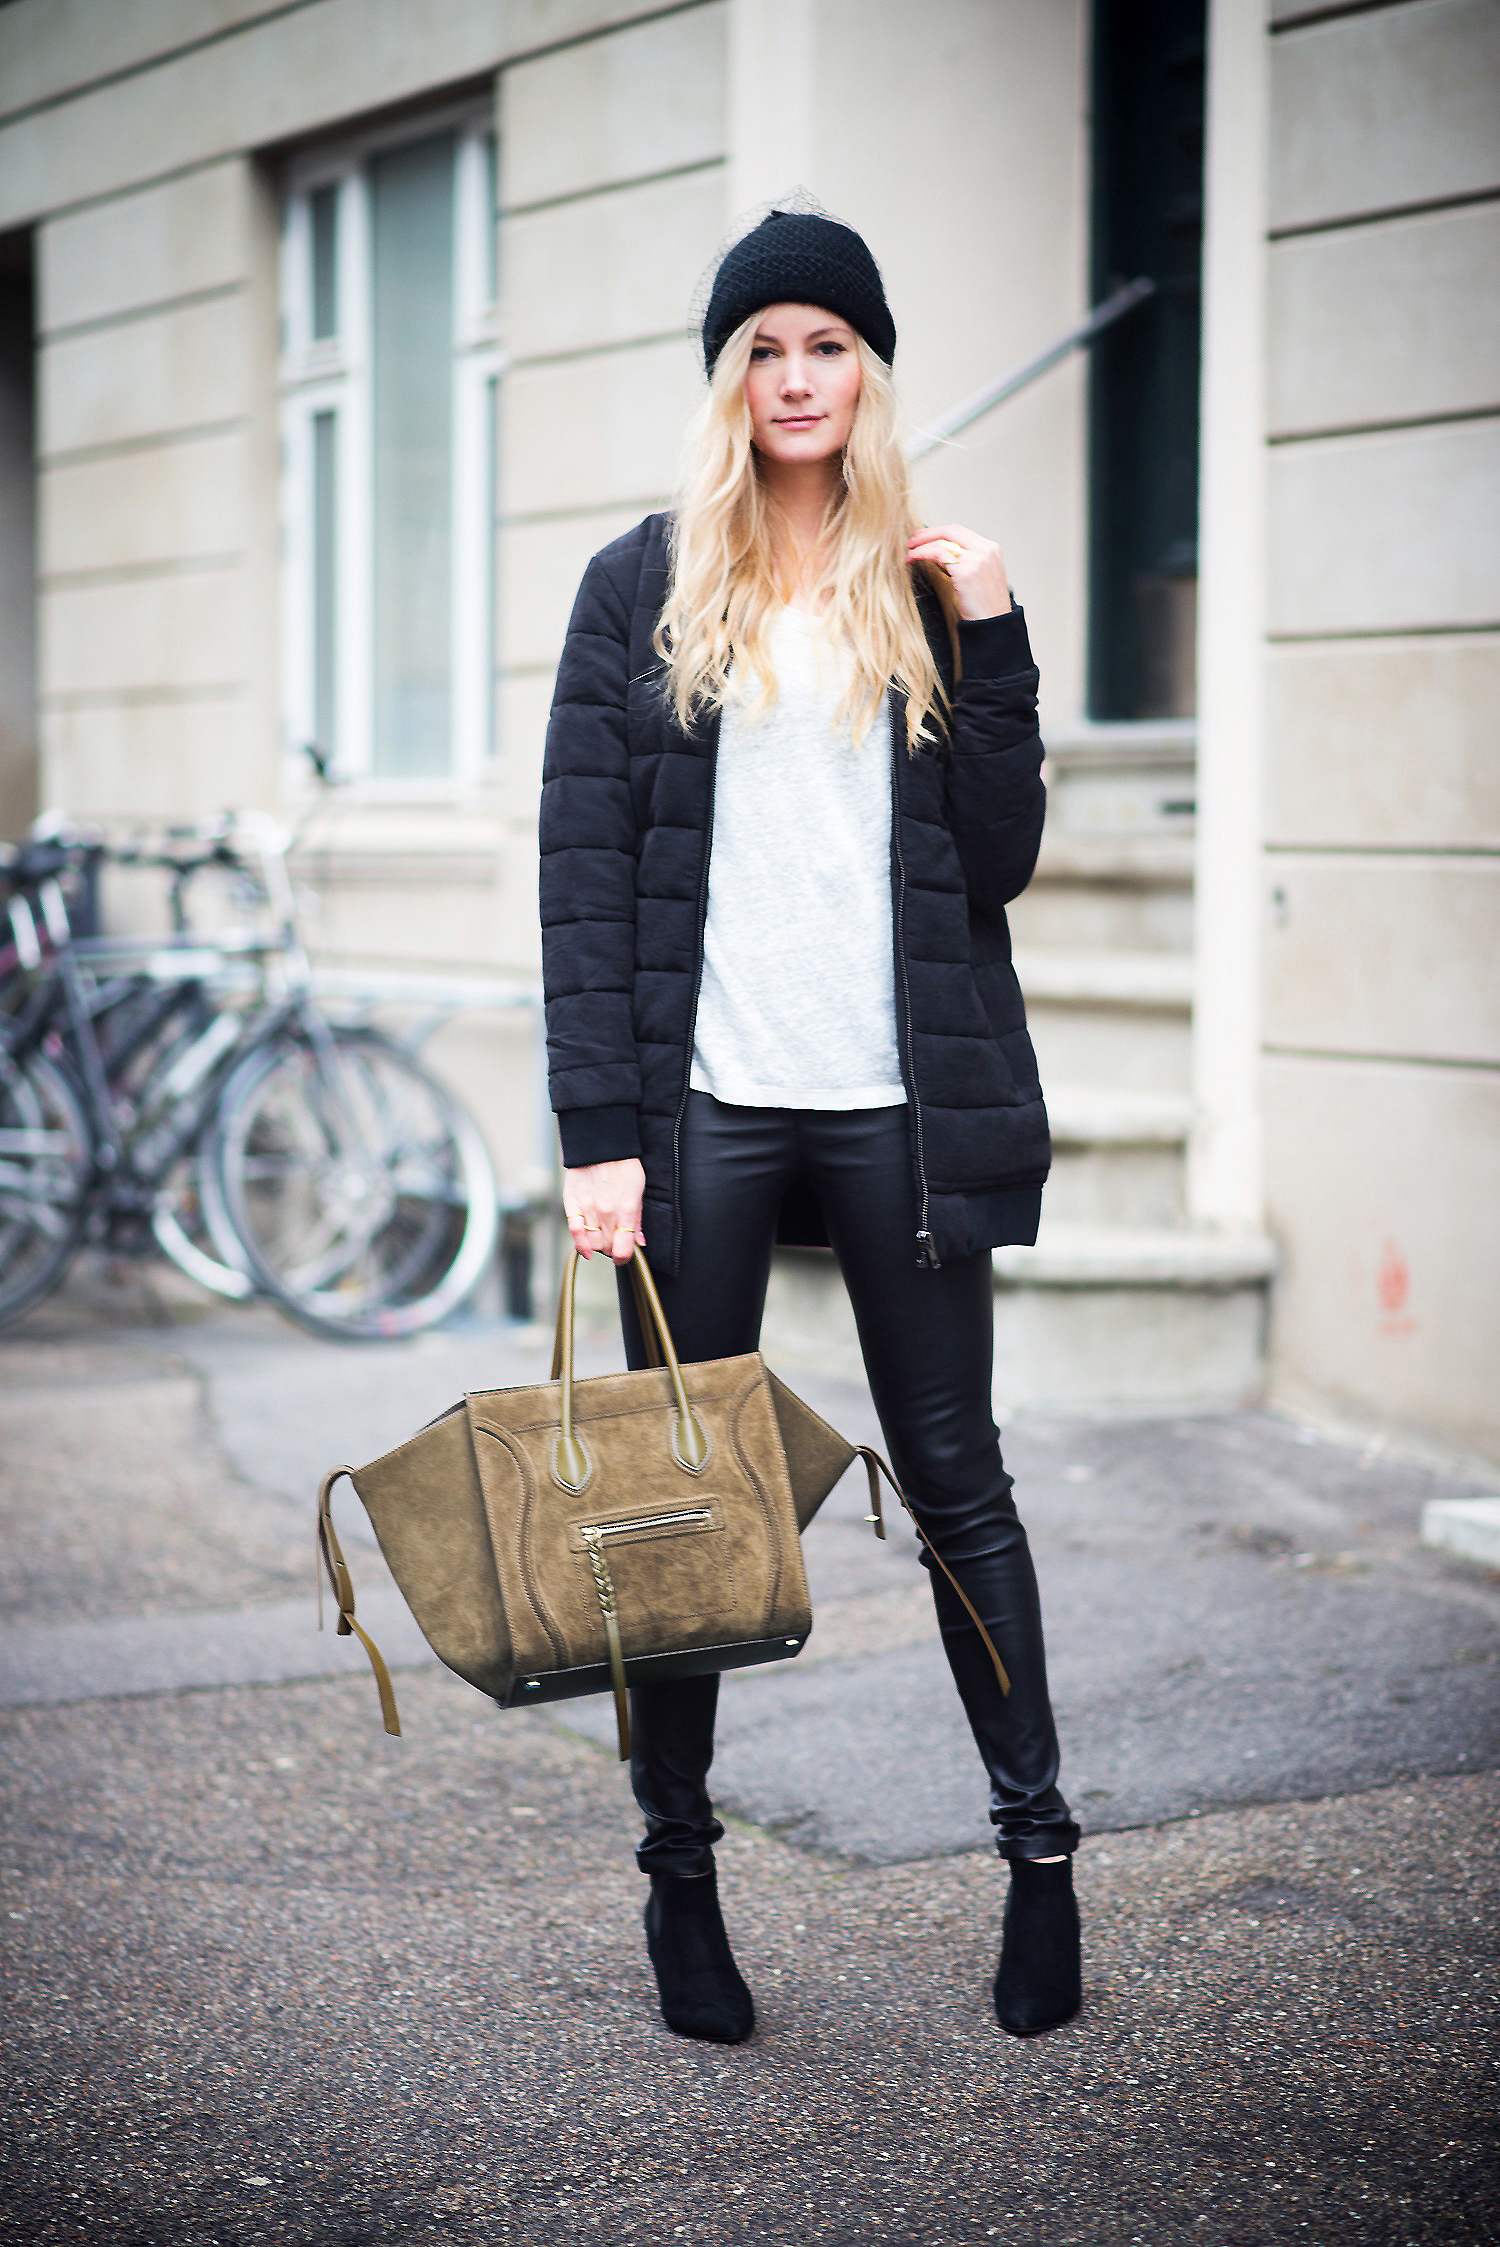 Bomber & leather - Christina Dueholm